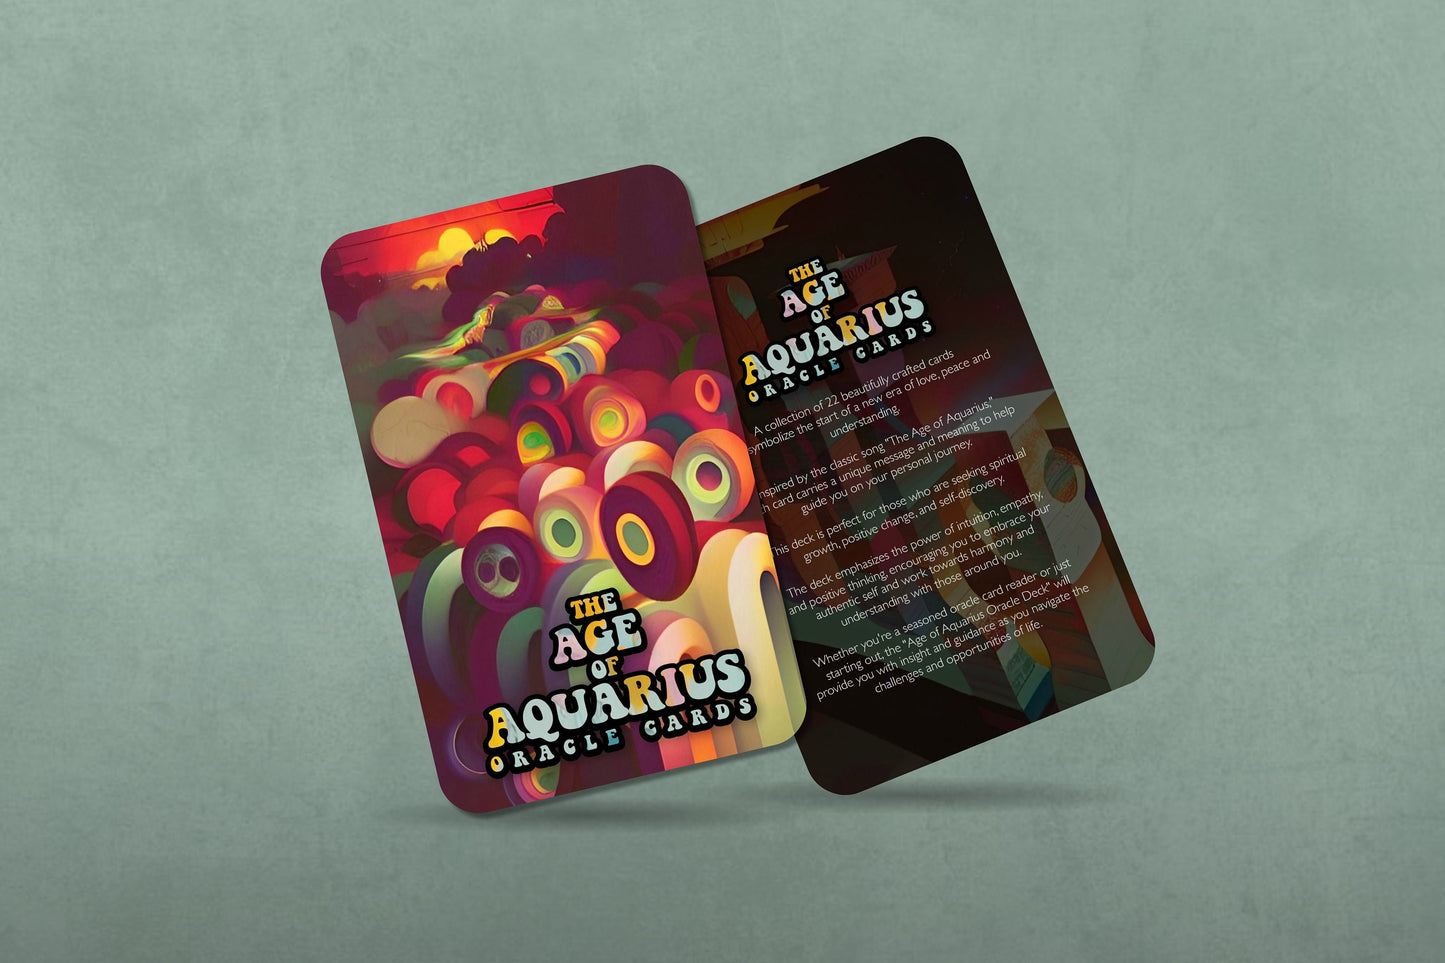 The Age of Aquarius Oracle Cards - New Age Oracle